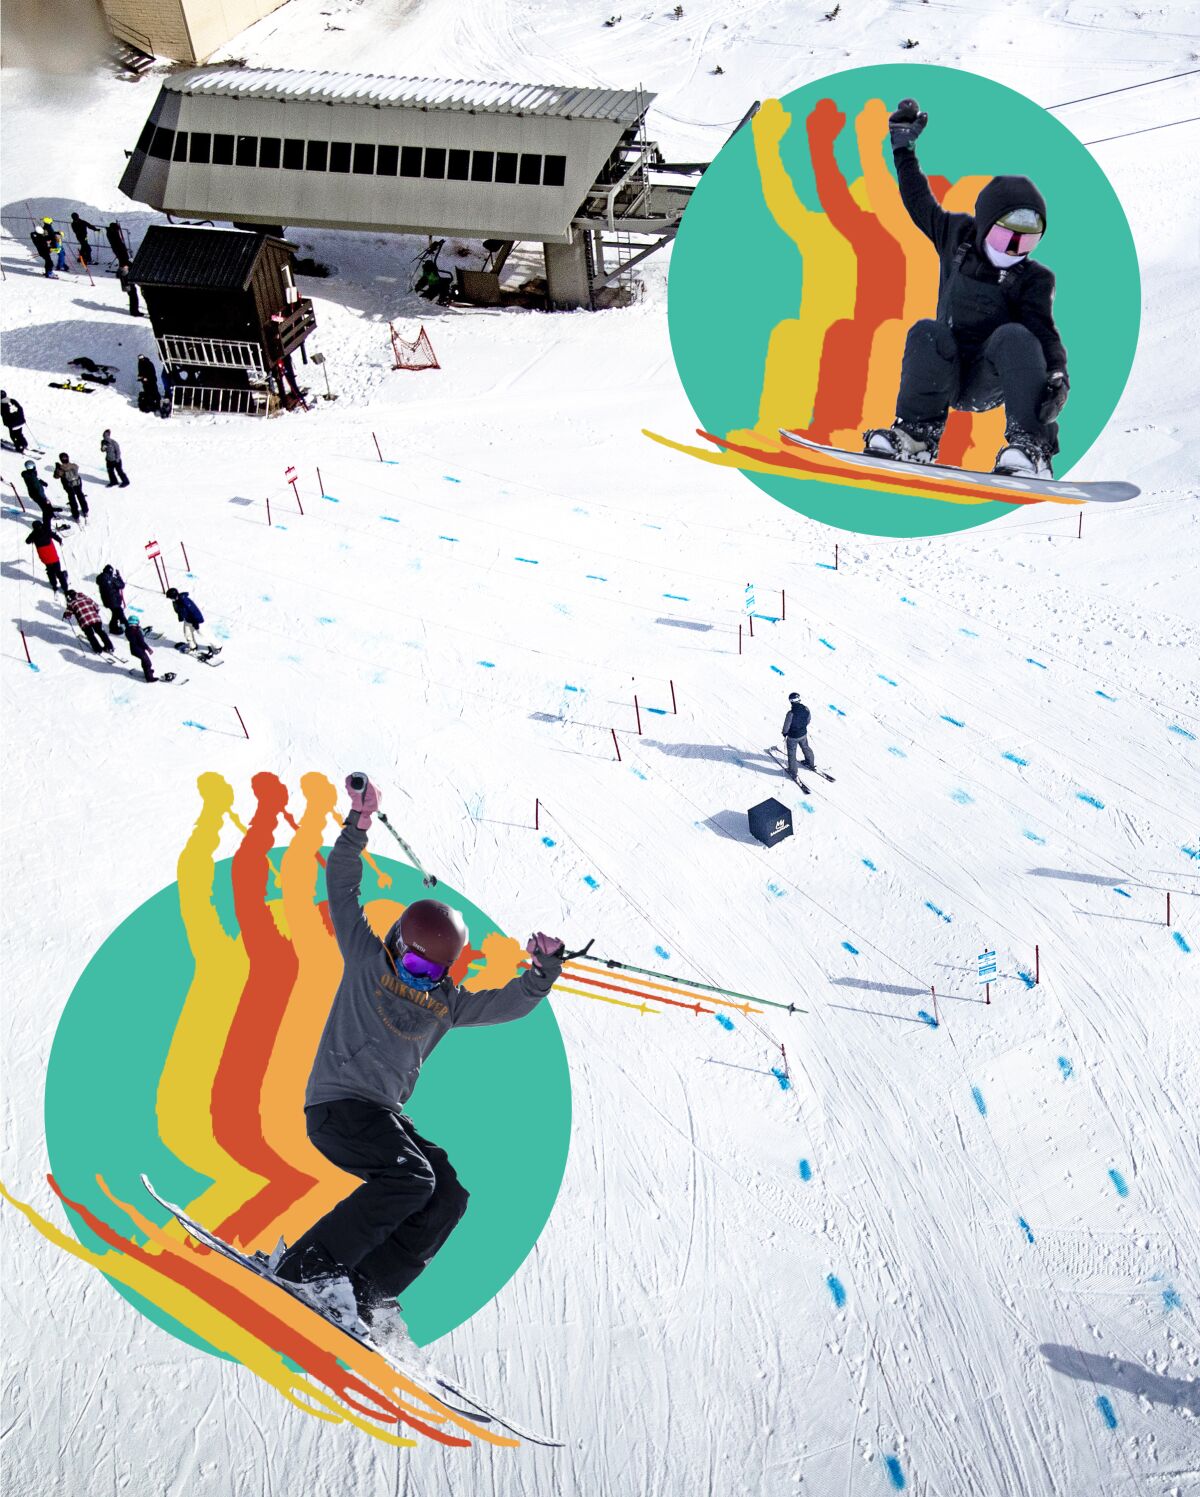 In an illustration, a skier and a snowboarder float above a resort ski lift line.